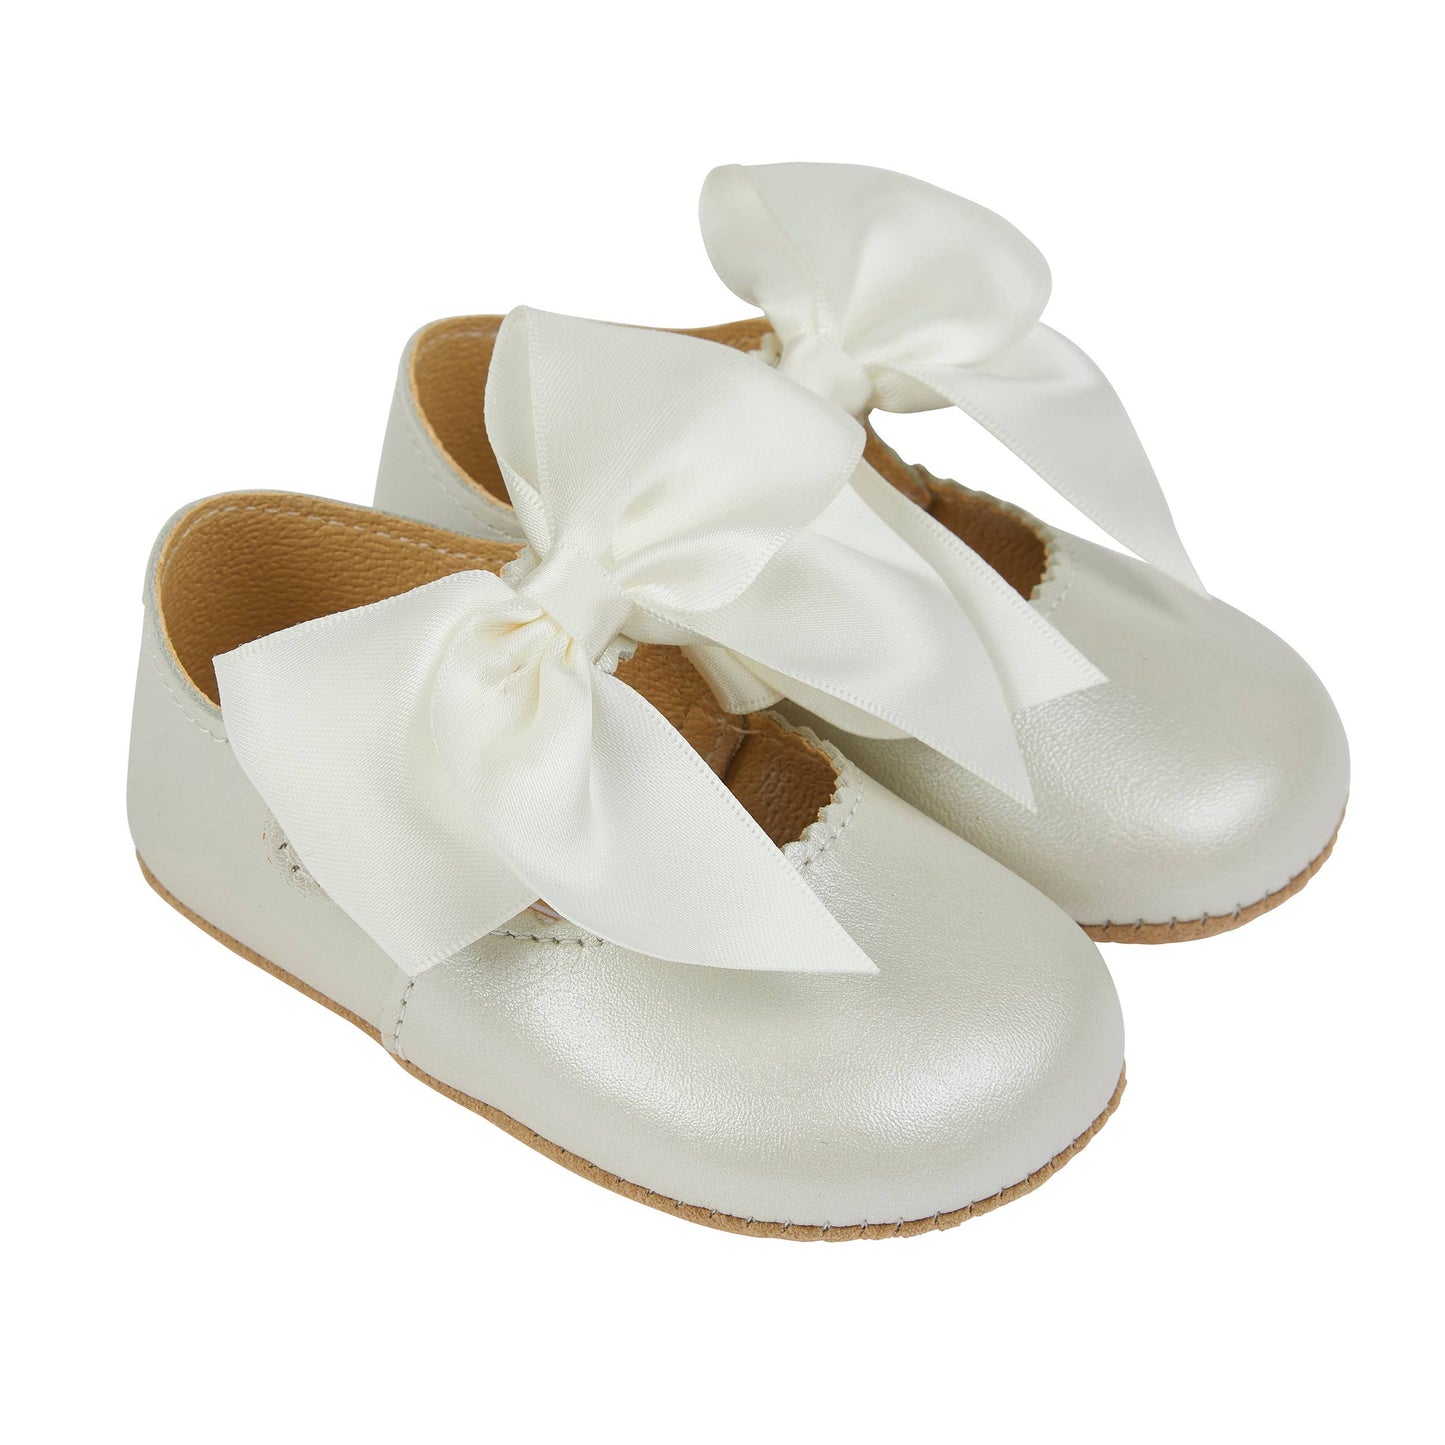 Bella Early Days leather pre-walker with bowS-Ivory